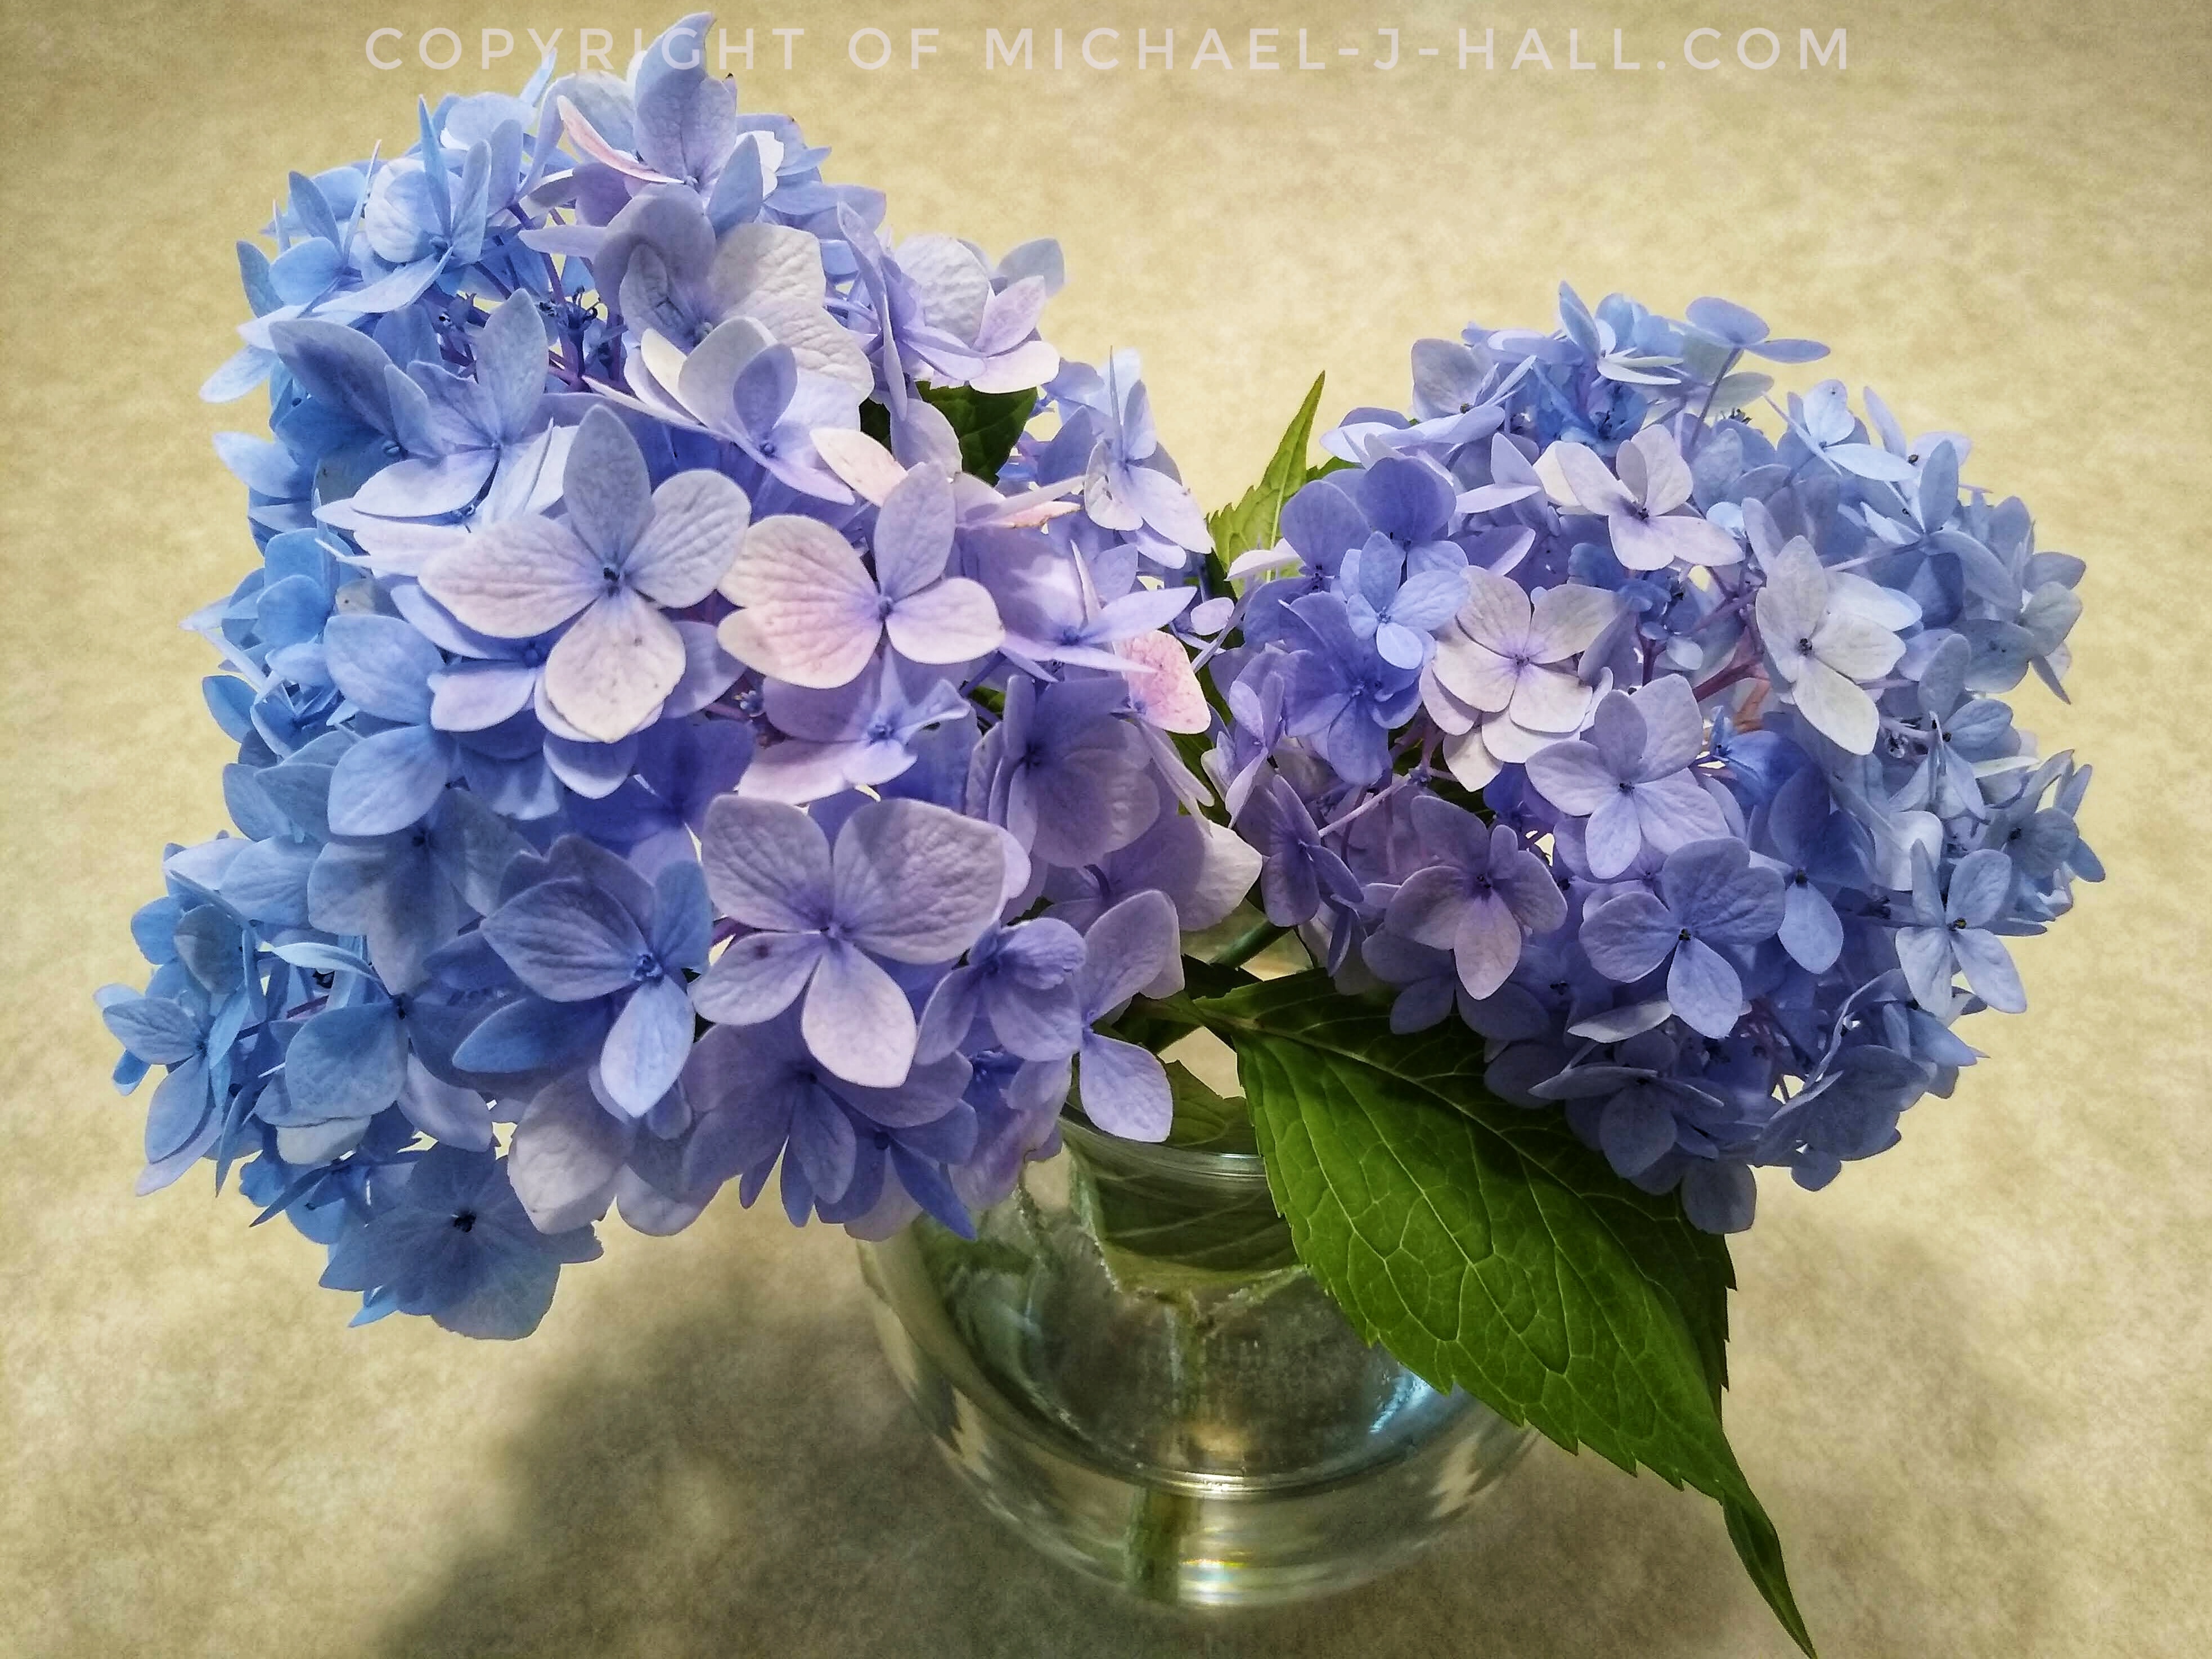 A pair of freshly cut, fully laden flower heads of hydrangea in powdery shades of blue and lavender pose gaily atop a clear, globed vase.